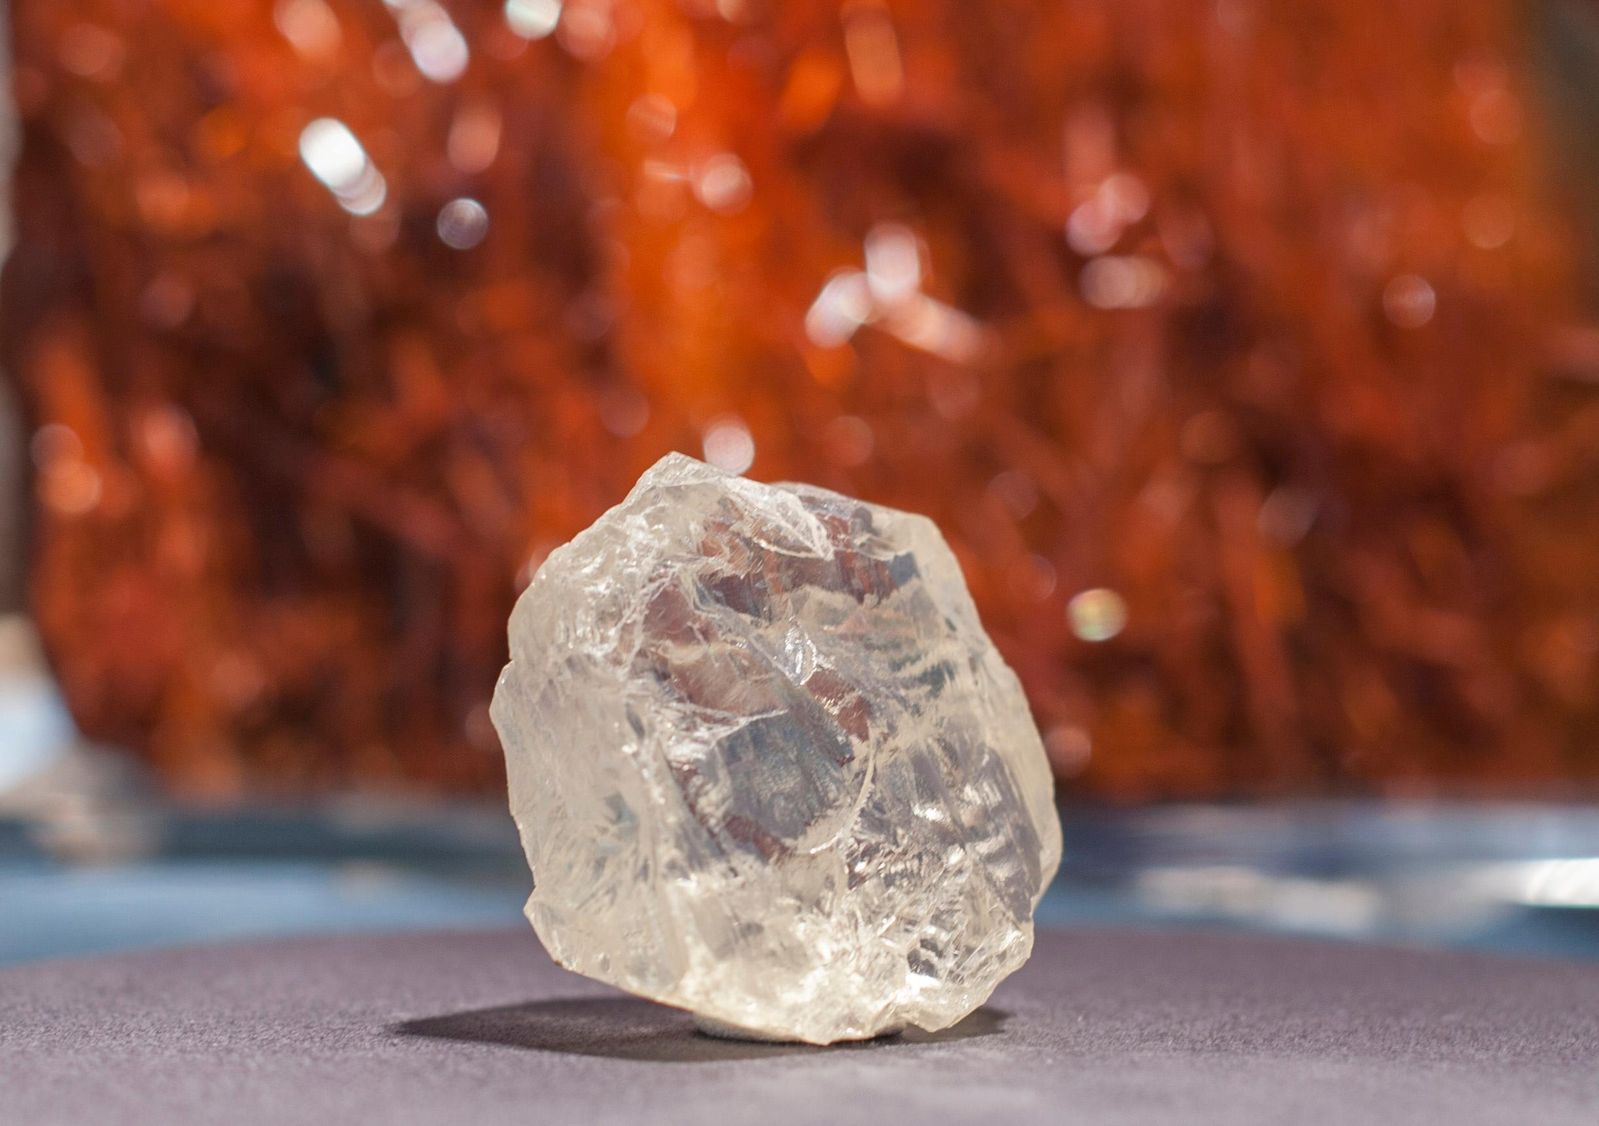 Giant diamond found in Canadian-owned mine could fetch $90-million